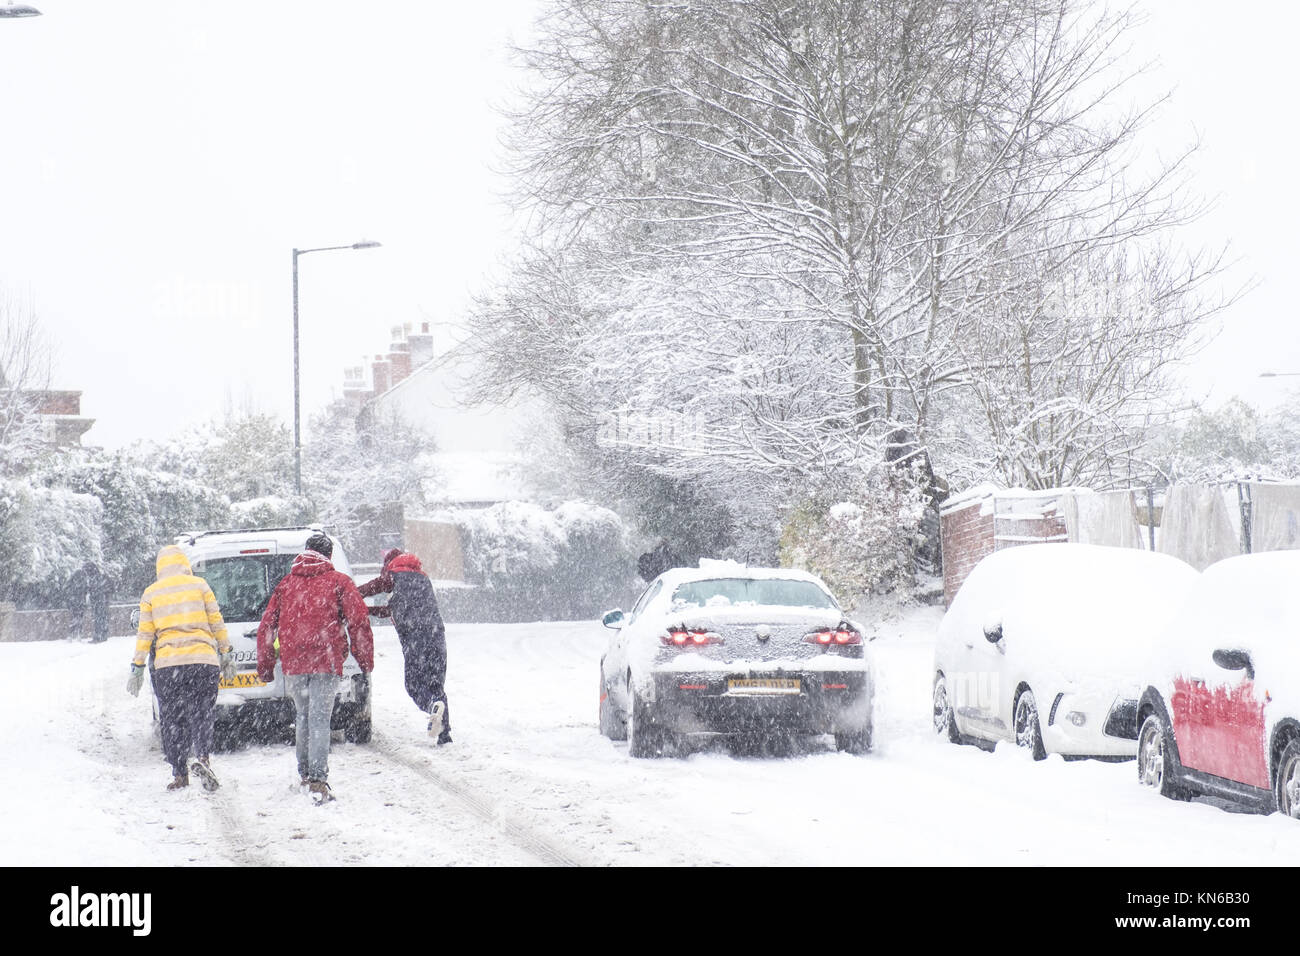 People Help Pushing Stuck Car in Heavy Snow Stock Photo